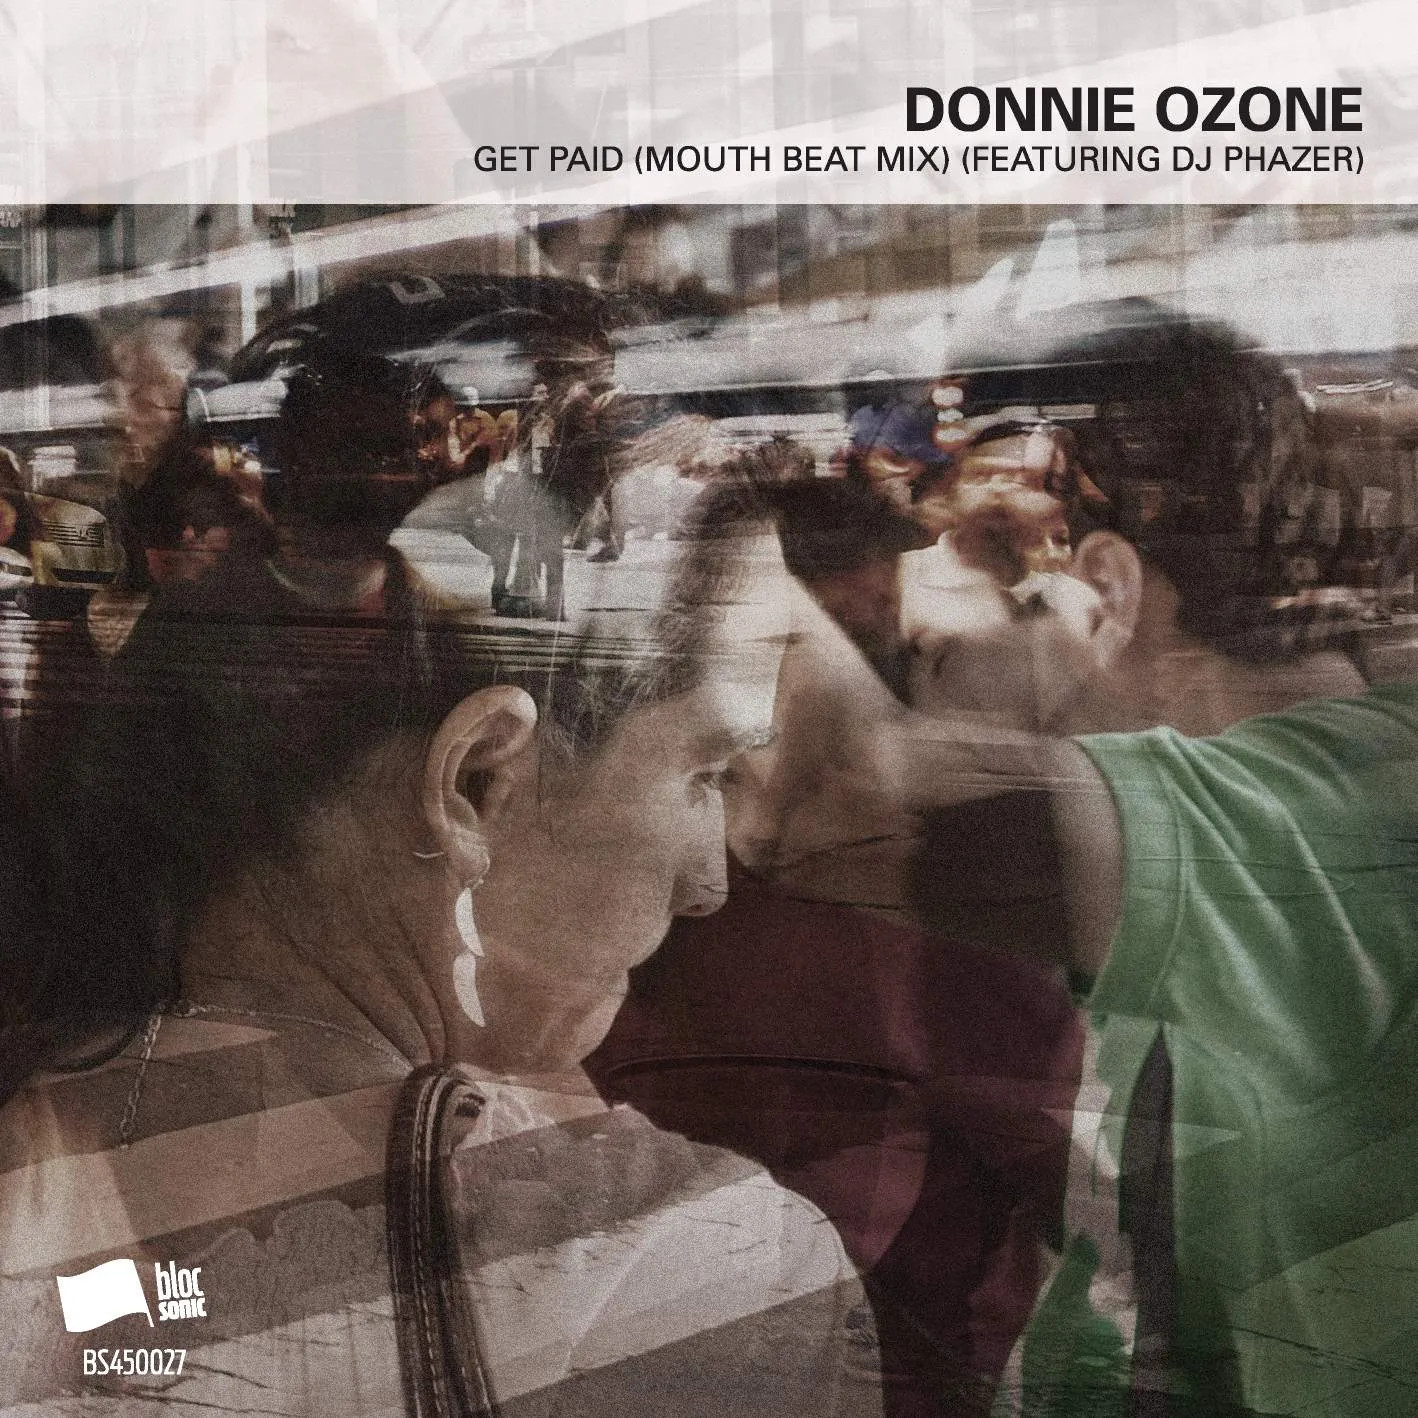 Album cover for “Get Paid (Mouth Beat Mix) (Featuring DJ Phazer)” by Donnie Ozone